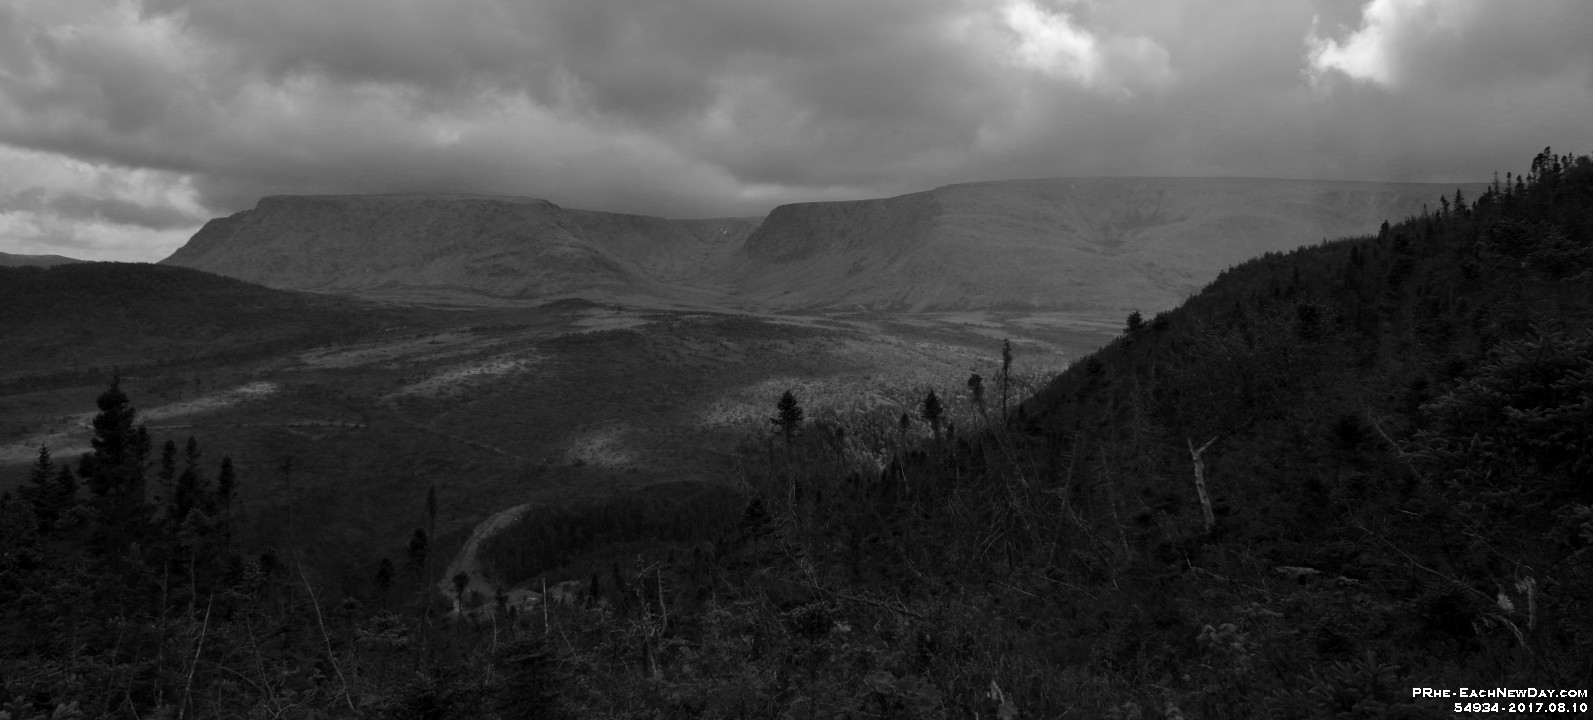 54934CrLeBw - Along the Lookout Trail - Gros Morne National Park